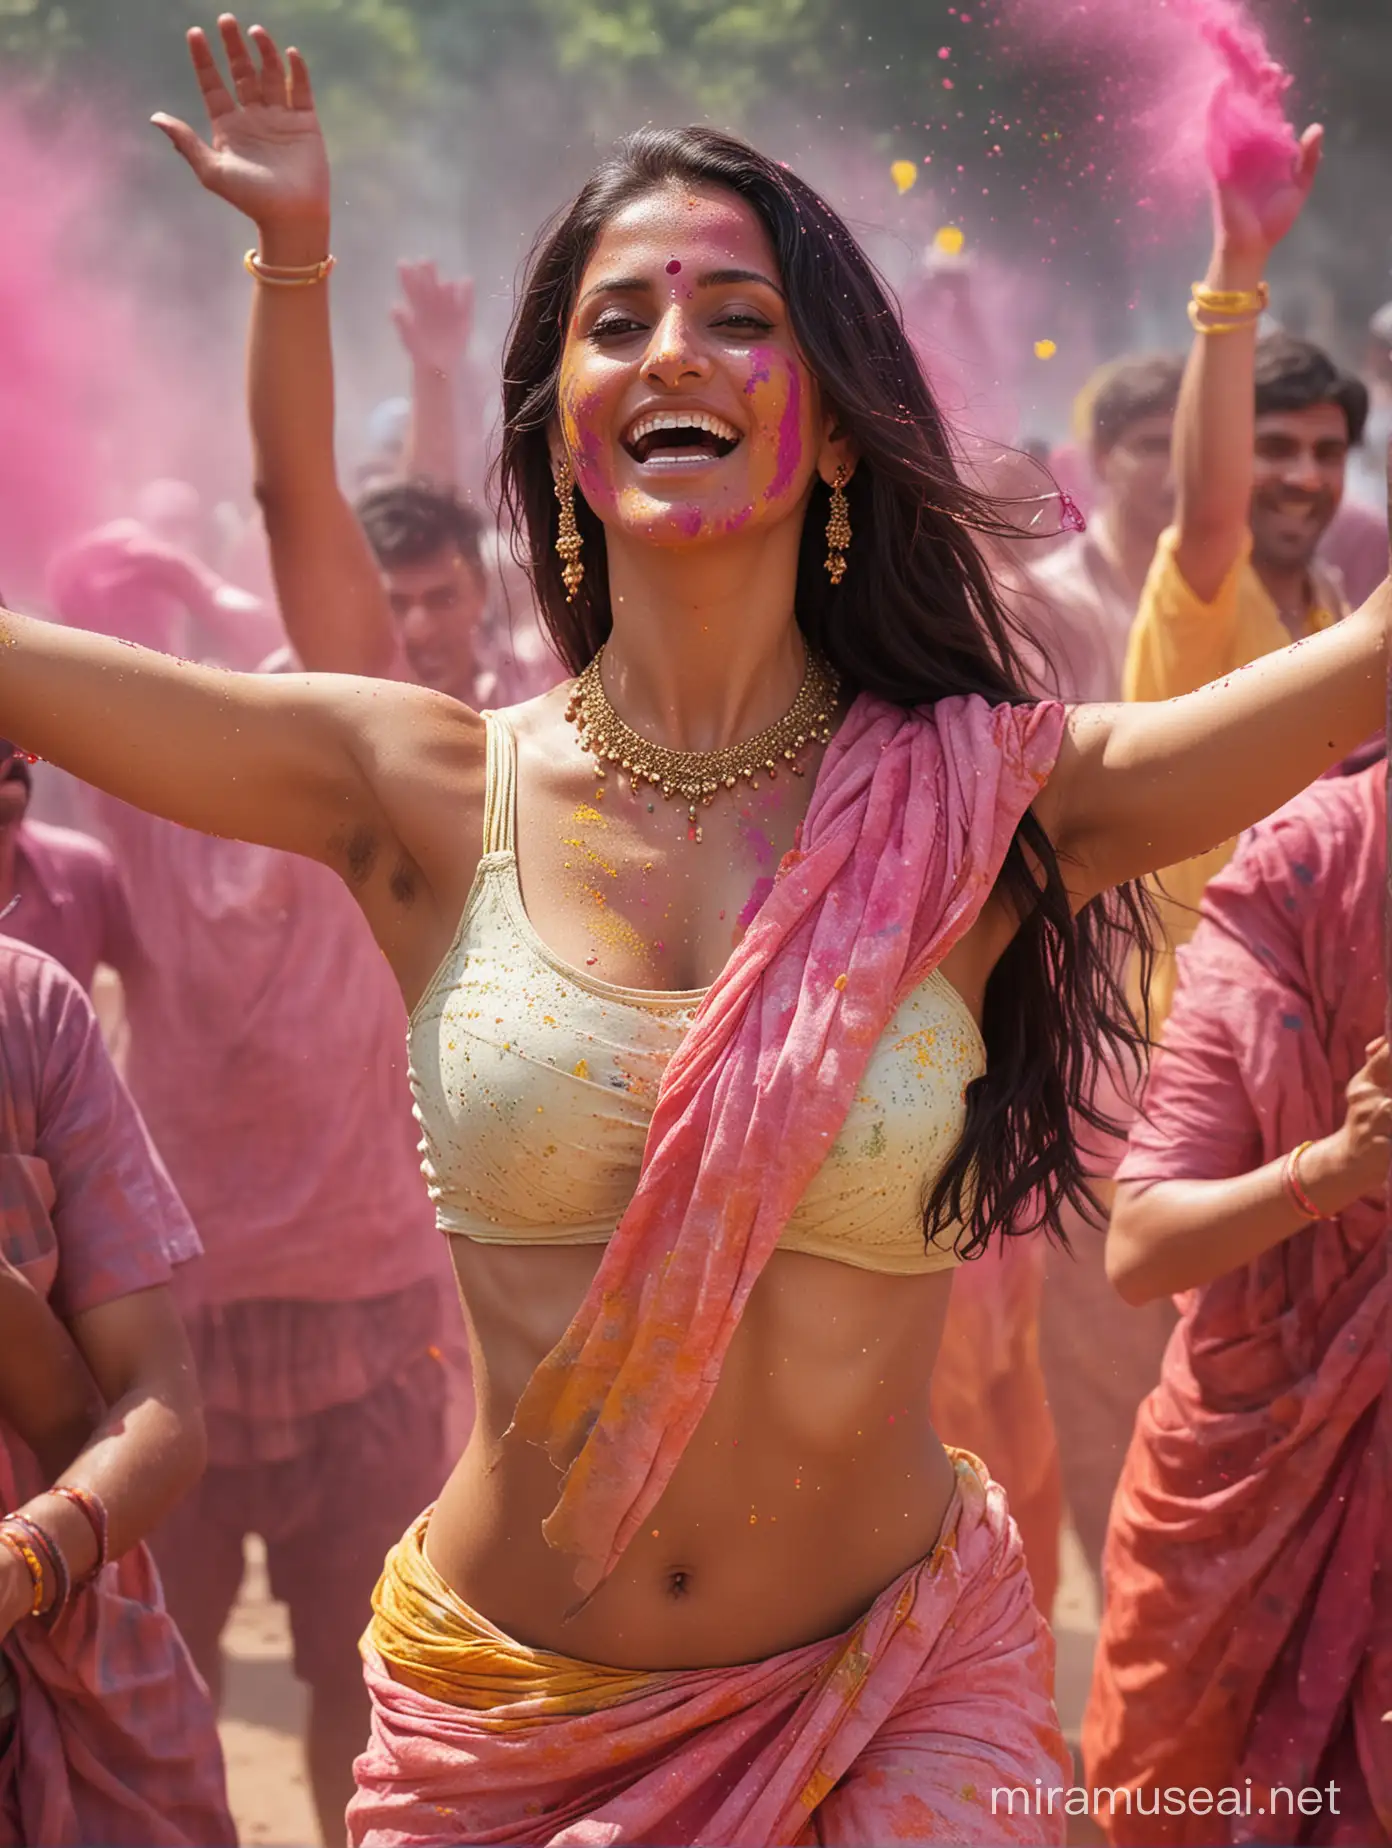 Ava addams,An Indian woman adorned in an offwhite saree having hairy armpits,sleeveless blouse with big breast showing hairy armpits, her figure accentuated by the flowing fabric as she confidently participates in the vibrant festival of Holi. Surrounded by a group of men, they engage in the playful tradition of throwing colors at each other, their laughter filling the air. The woman's long, dark hair cascades down her back, drawing attention to her glowing skin as she playfully dodges and catches colorful powders and water balloons. Her eyes sparkle with amusement and confidence as she teases the men around her, her movements graceful and alluring. The men, equally entranced by her beauty and playful demeanor, continue to shower her with colors, their laughter and joy infectious. In the background, the bright hues of Holi colors paint the scene, creating a vibrant contrast against the otherwise neutral tones of the woman's attire. The image captures the essence of Holi, a festival of love, color, and unity, while also highlighting the alluring beauty and empowered femininity of the Indian woman at its center.